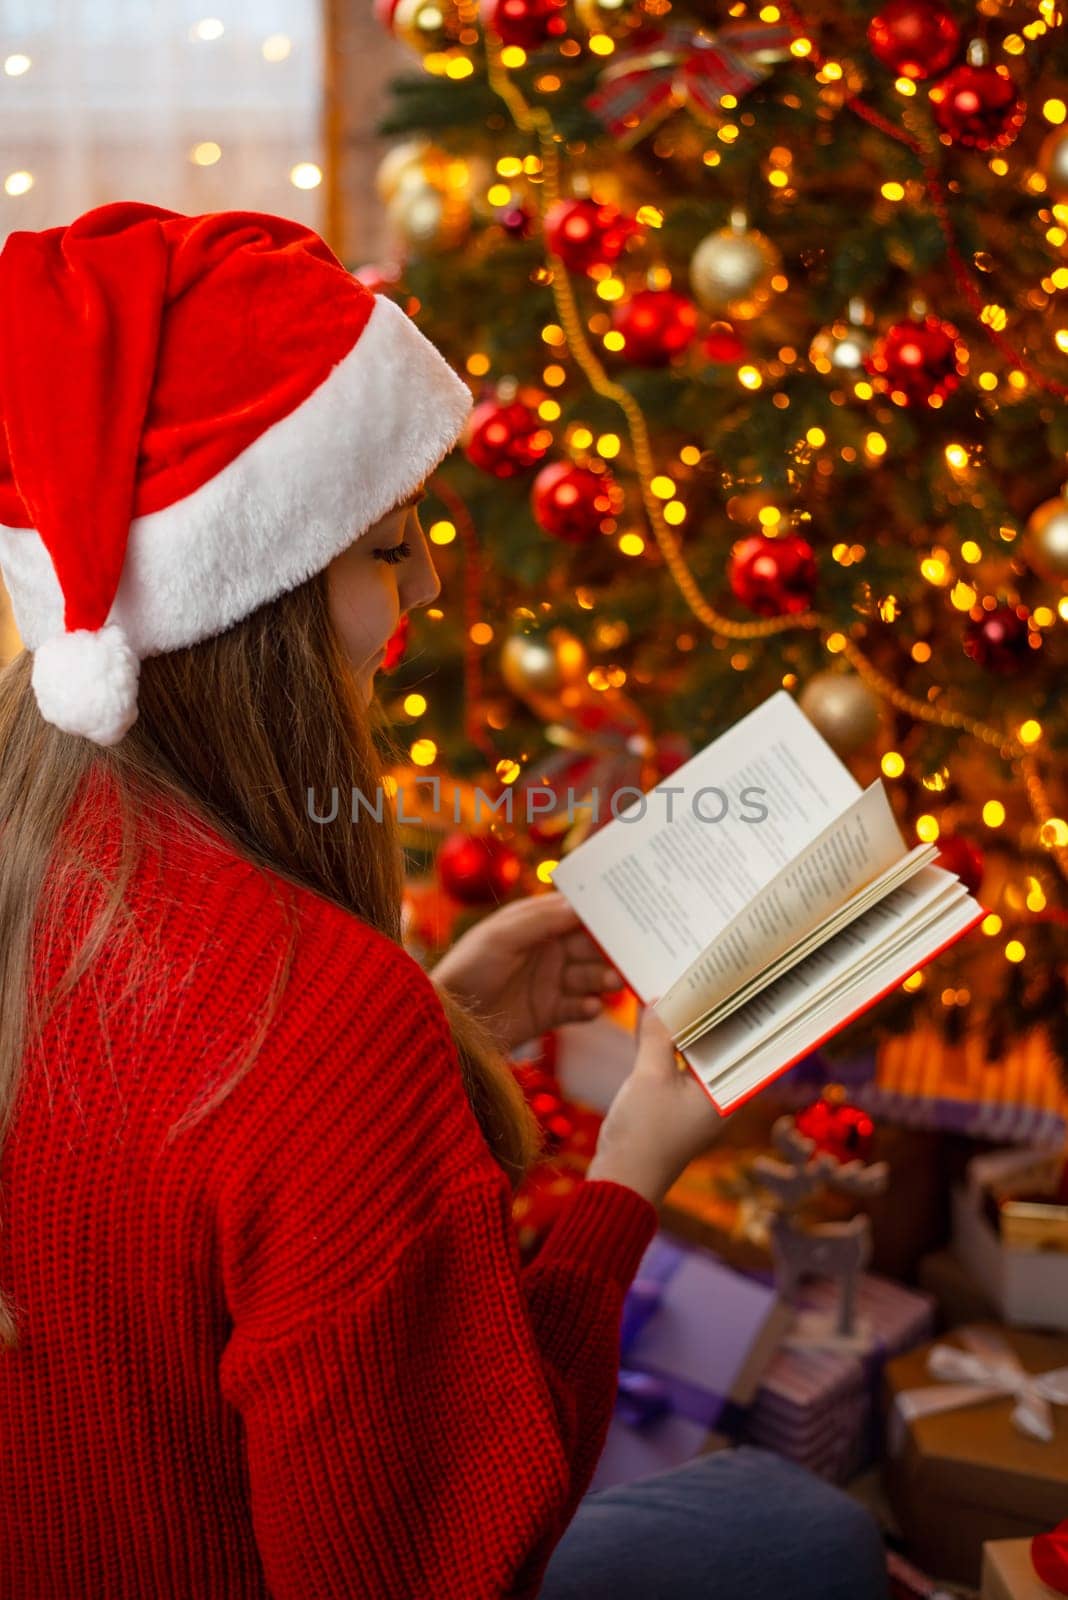 Vertical photo of young woman sitting near decorated Christmas tree and reading a book